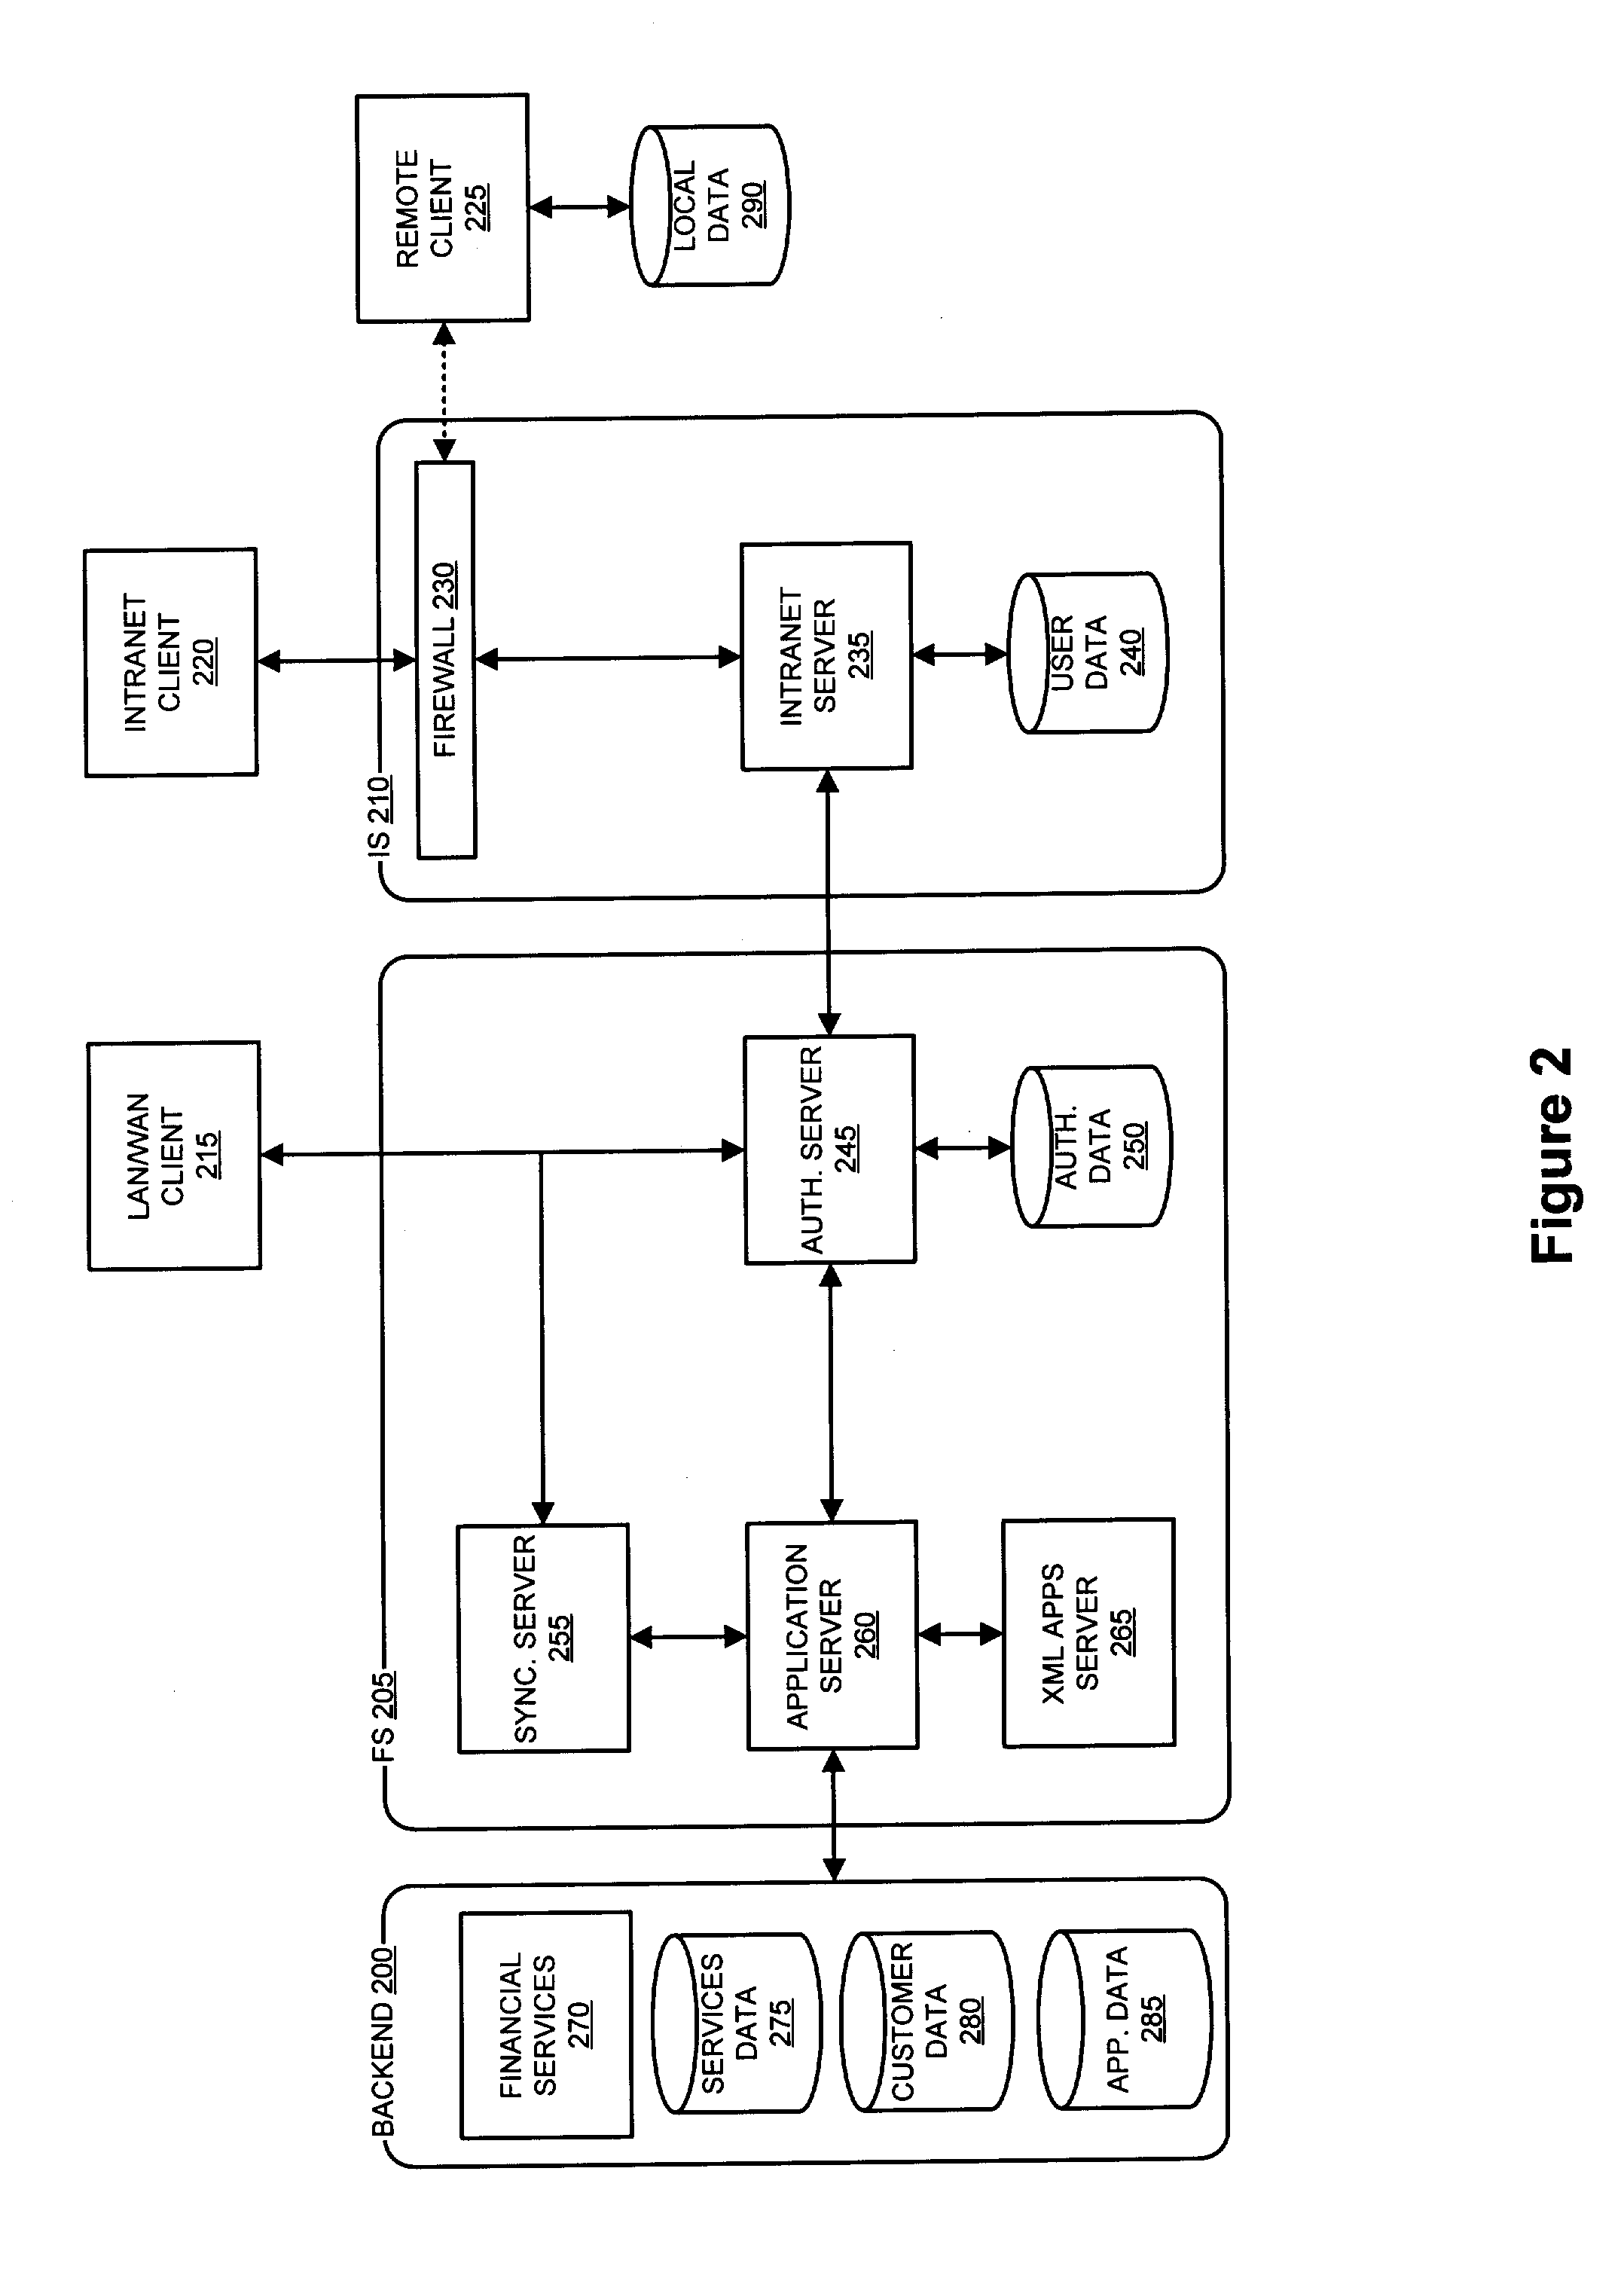 System and method for remote collection of data